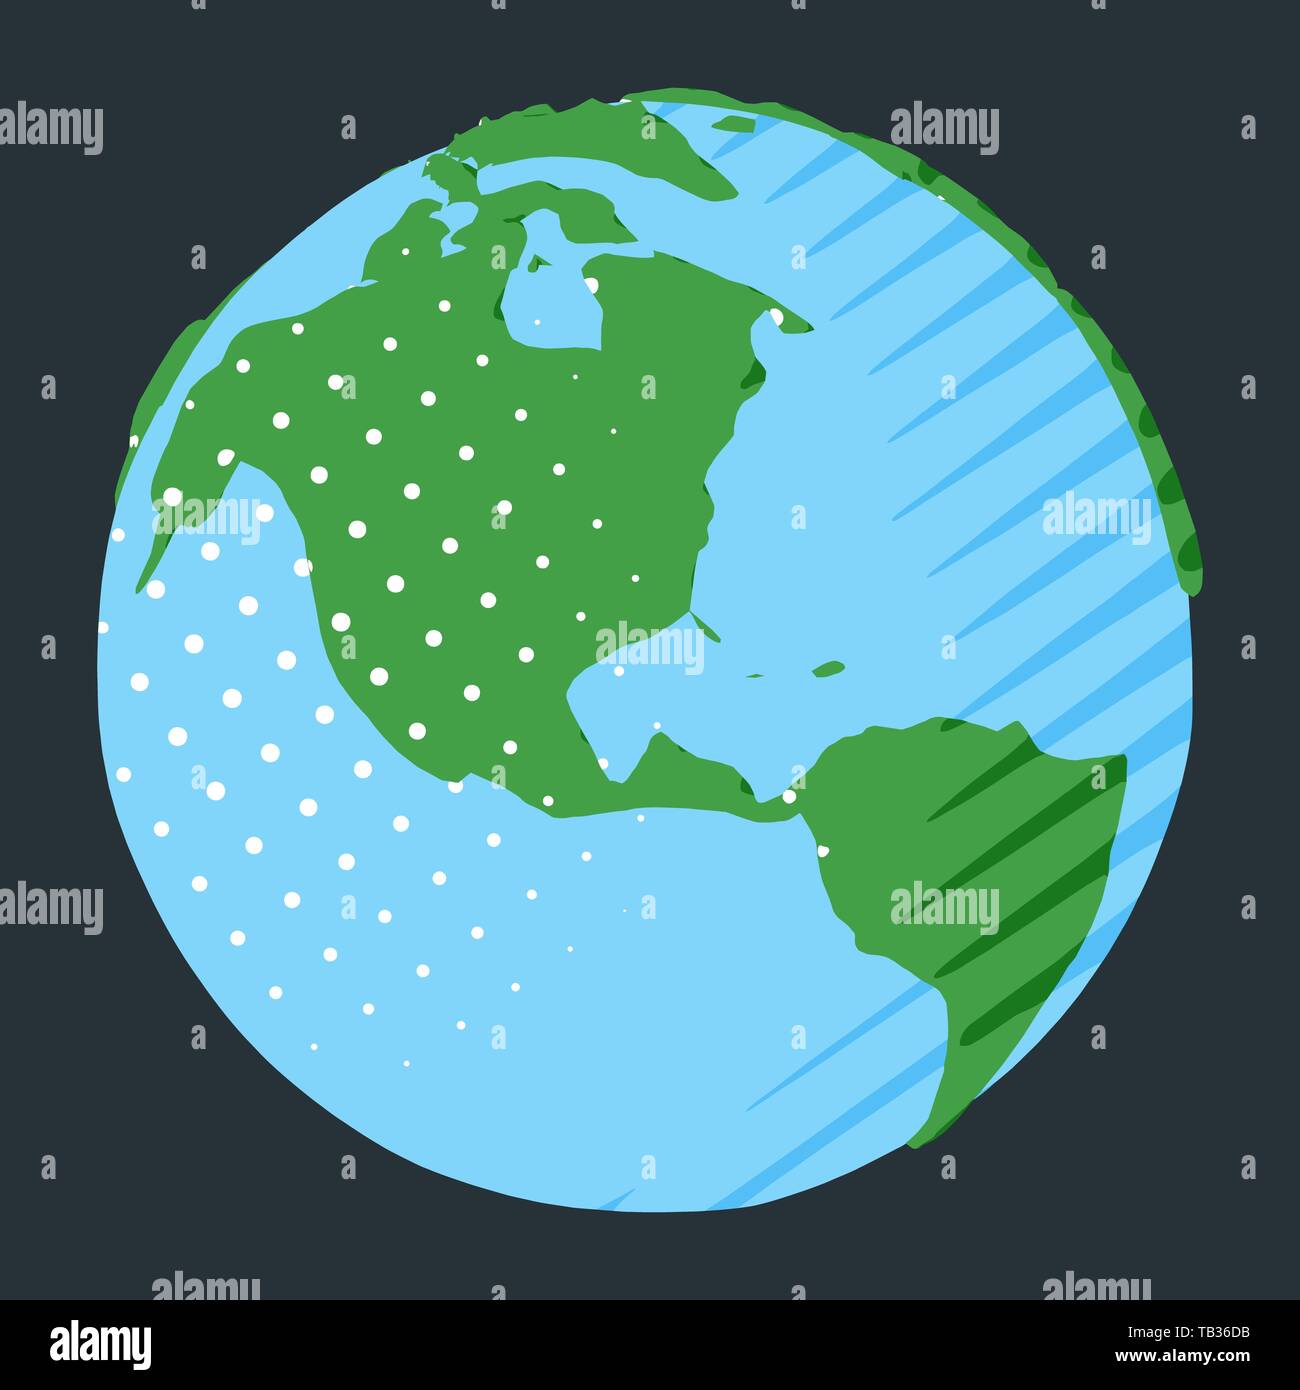 Western hemisphere on globe with USA placing on planet Earth in comic style Stock Photo